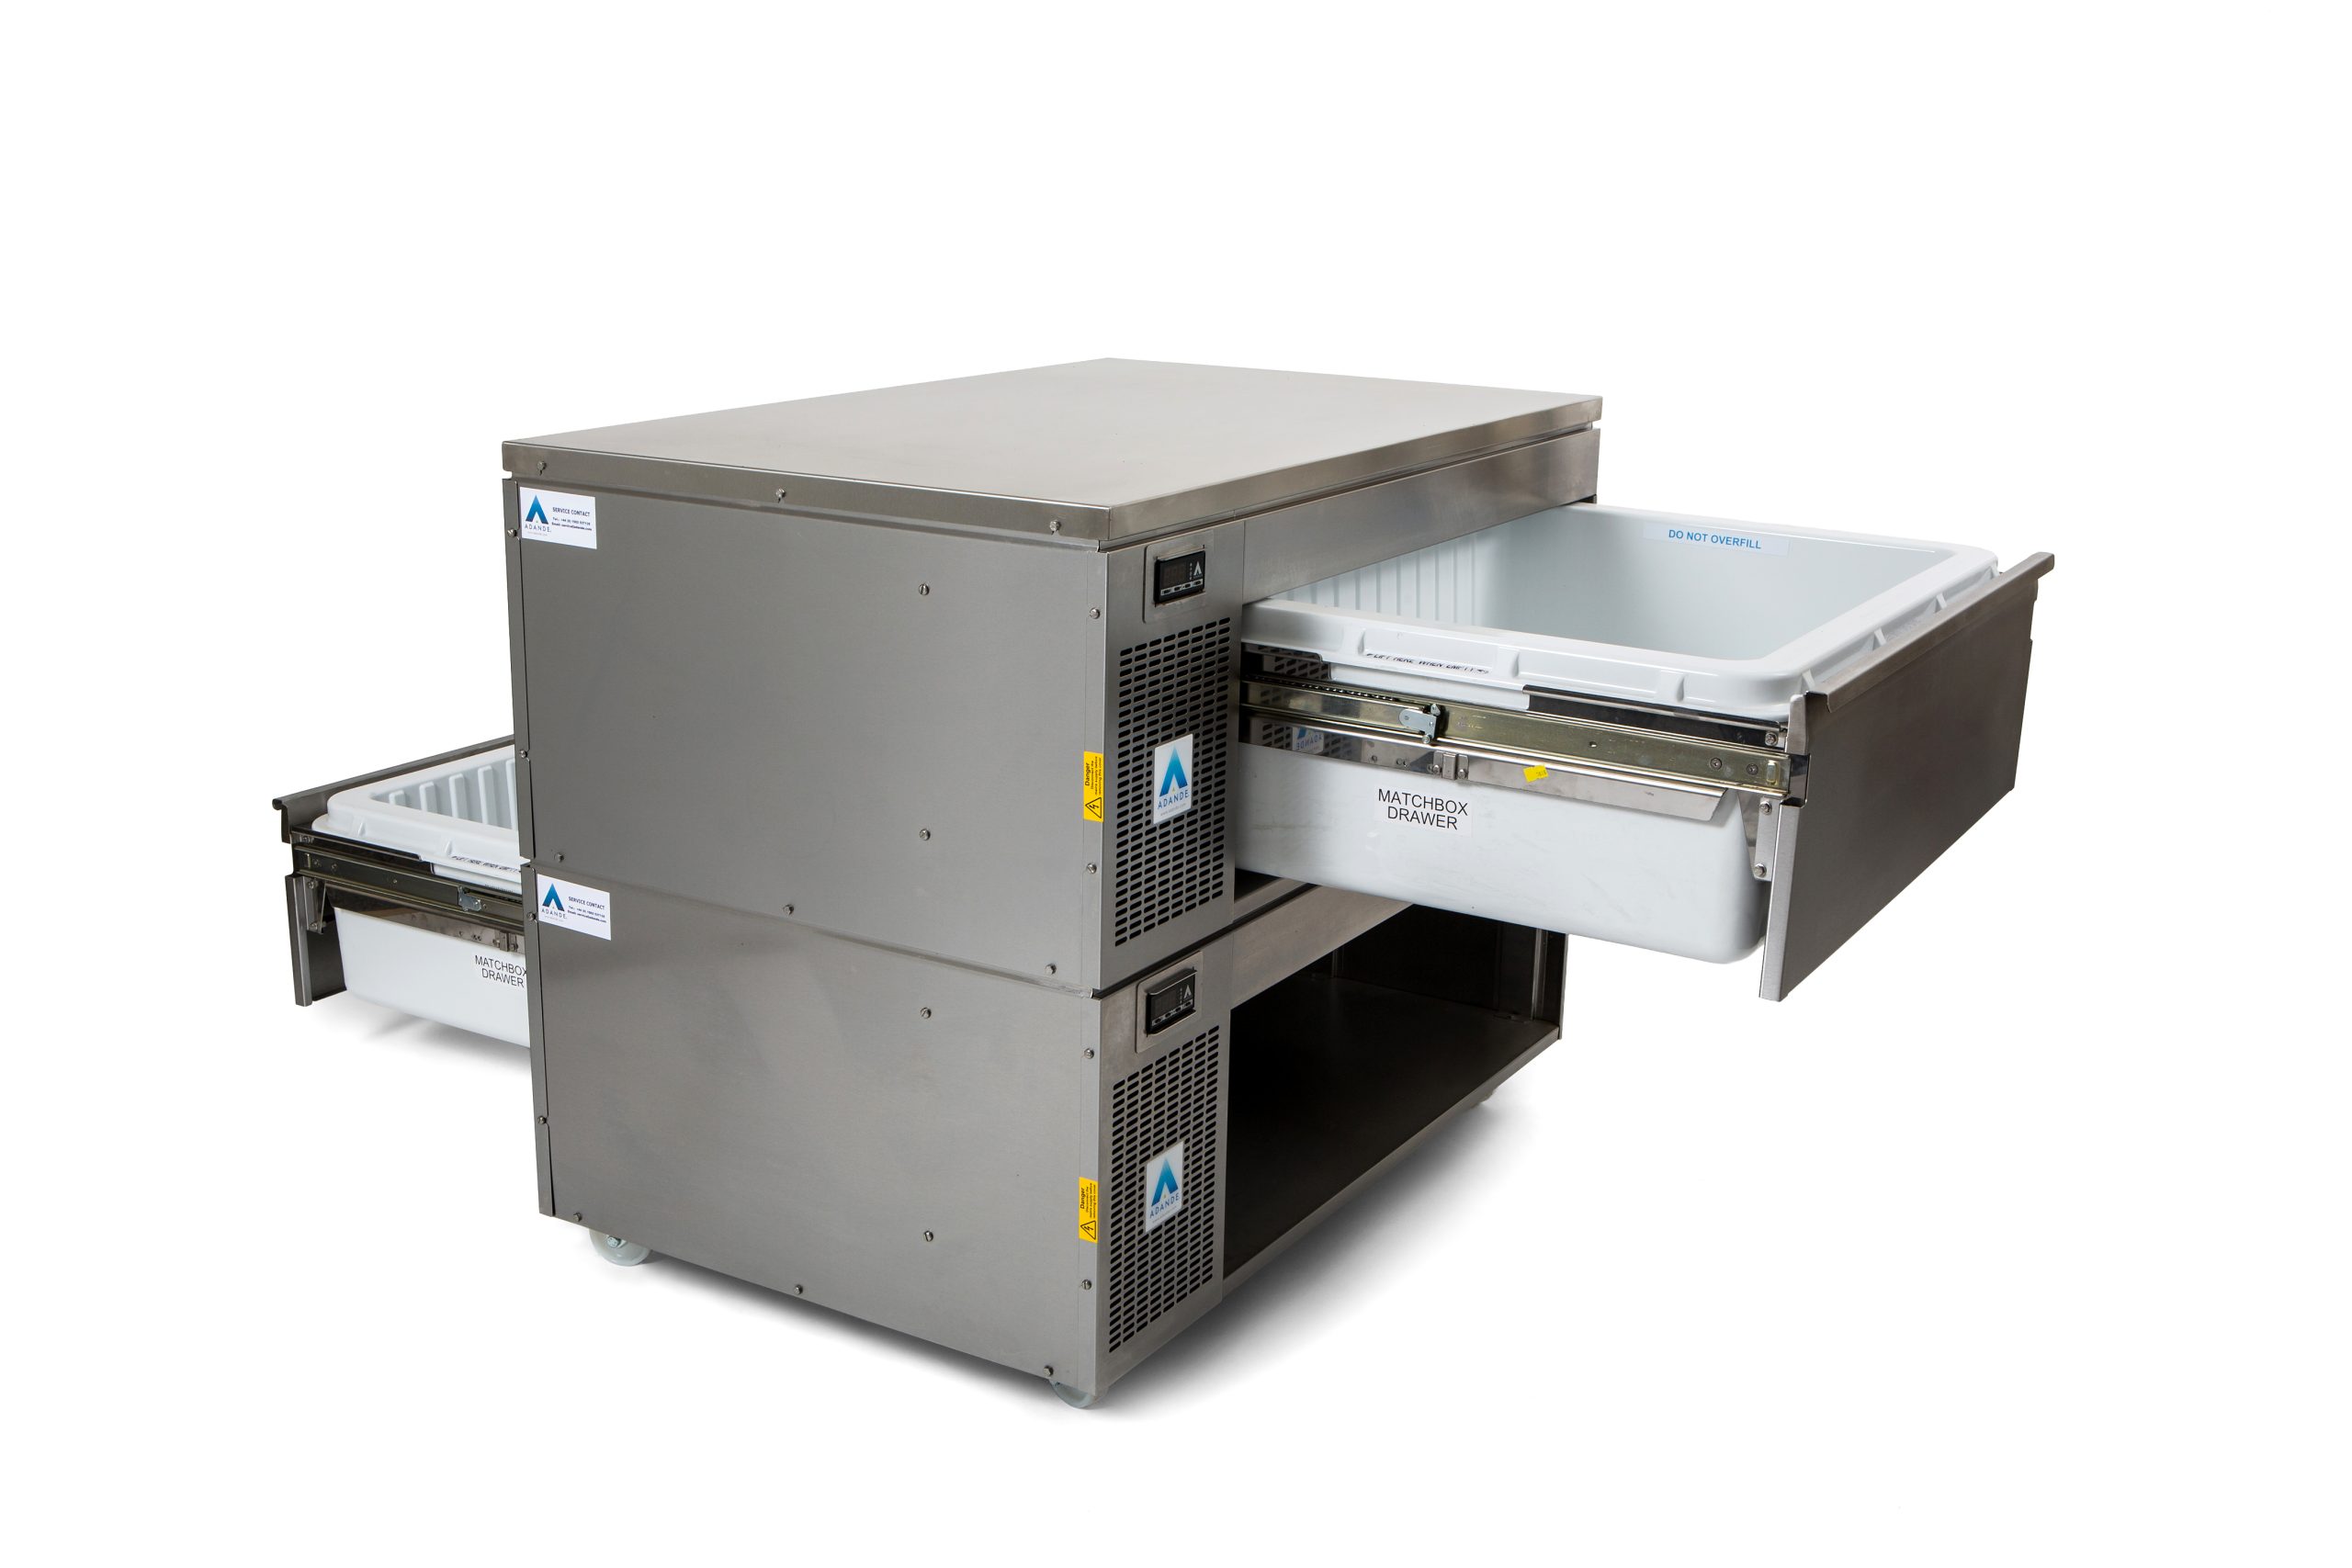 ADANDE – HOTEL REFRIGERATION PRODUCTS / HOTEL REFRIGERATED DRAWERS